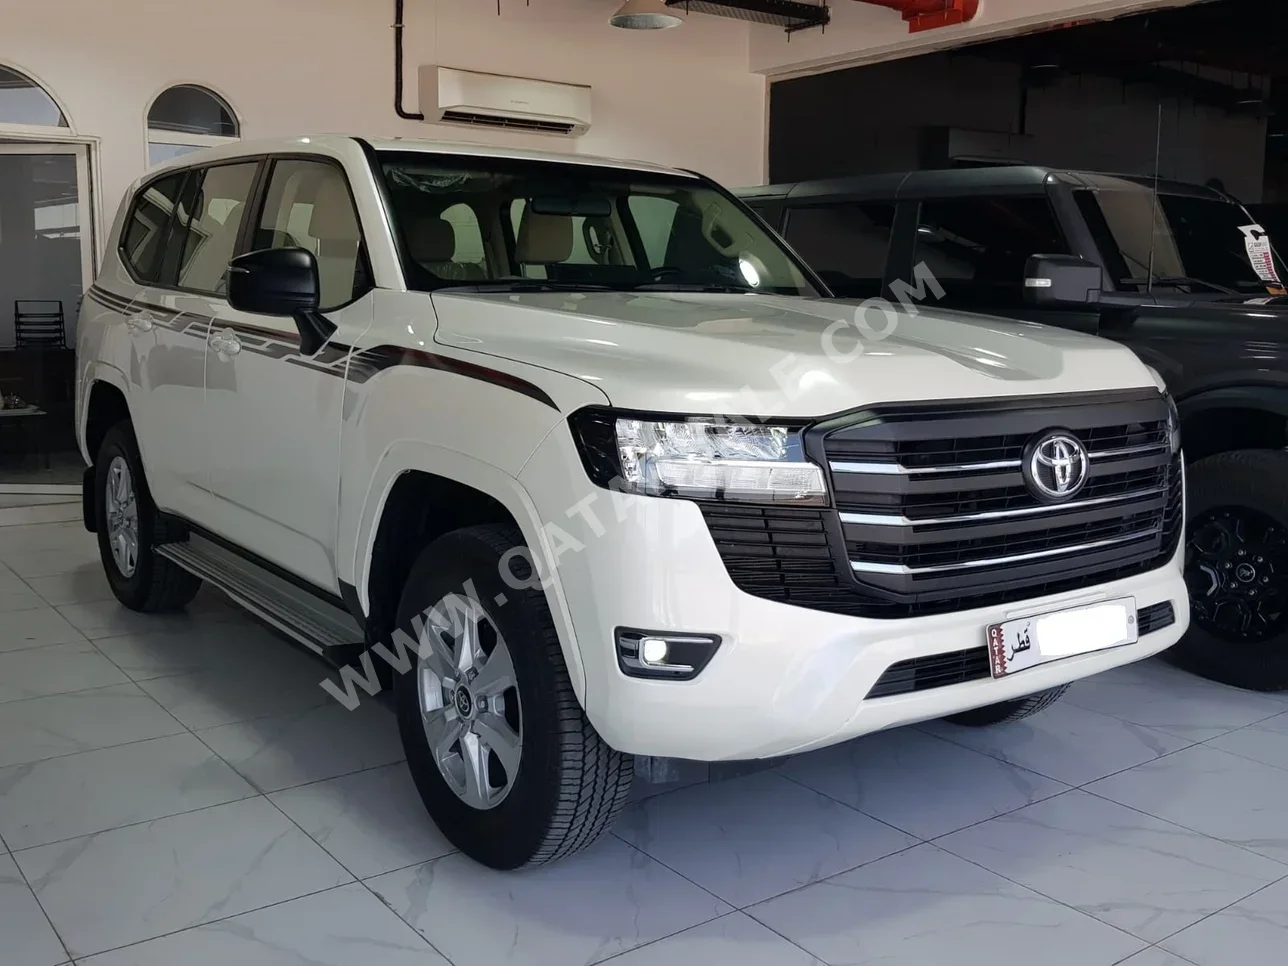 Toyota  Land Cruiser  GXR Twin Turbo  2023  Automatic  19,000 Km  6 Cylinder  Four Wheel Drive (4WD)  SUV  White  With Warranty